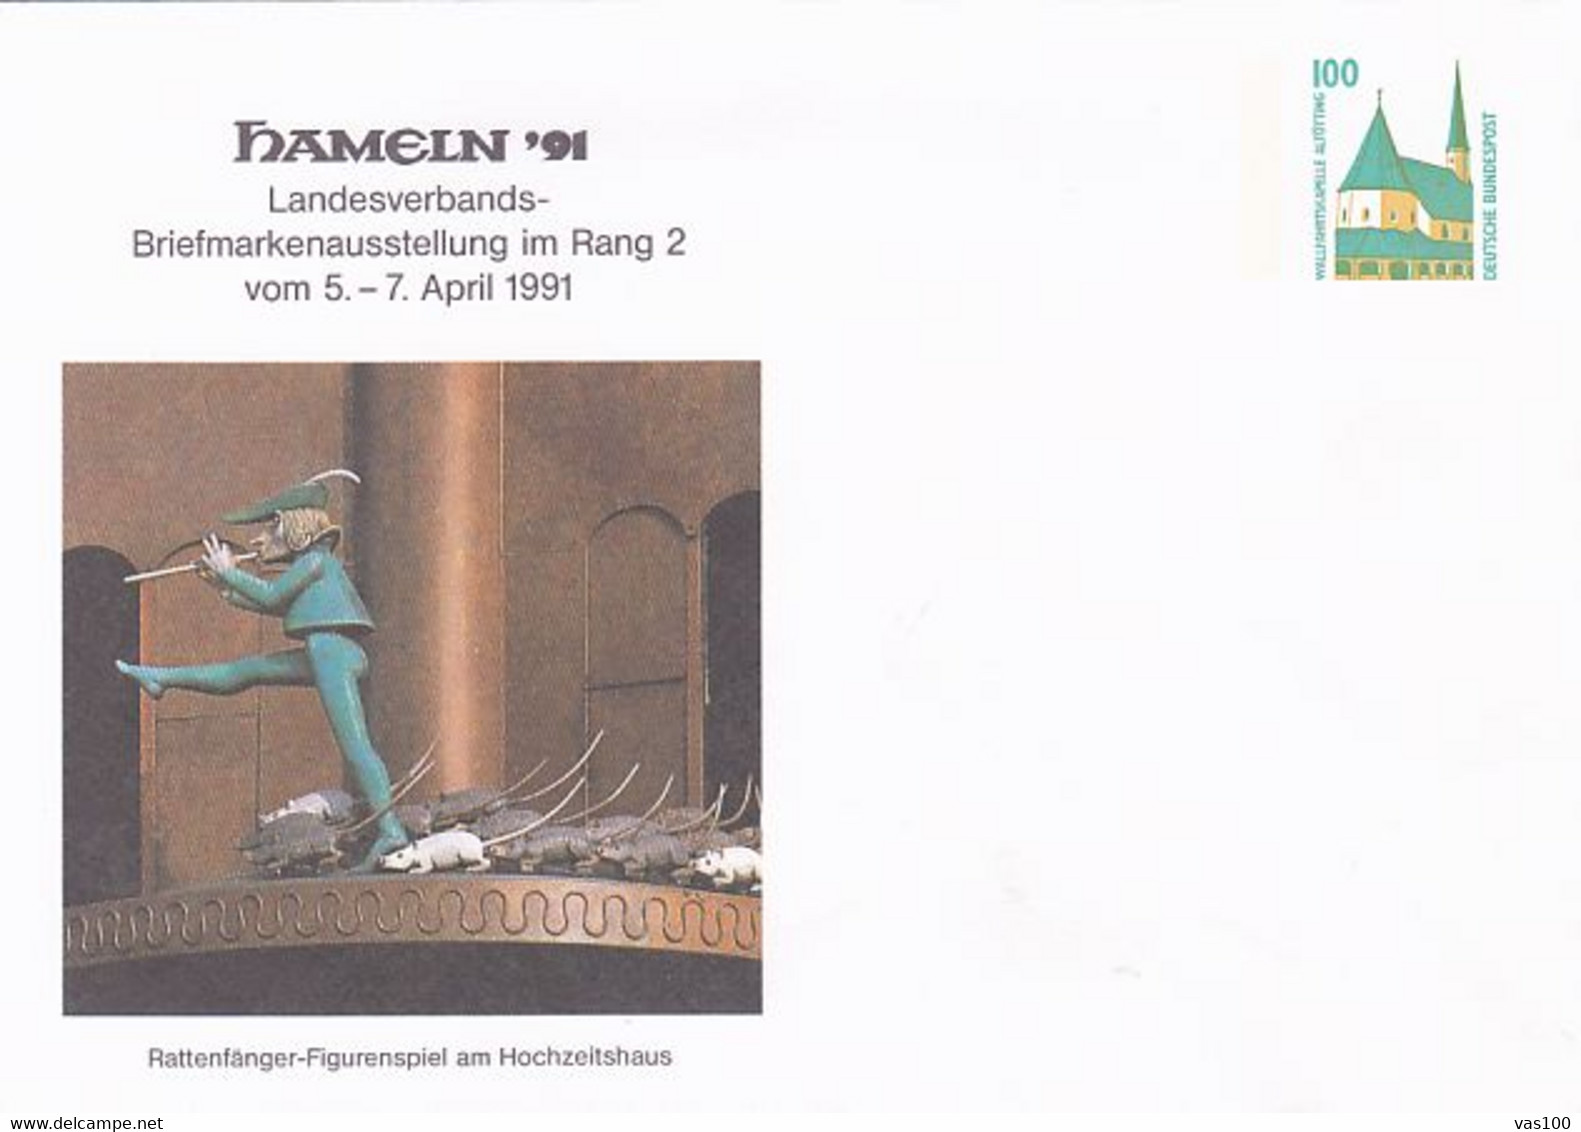 HAMELN PHILATELIC EXHIBITION, THE PIED PIPER, CHAPEL, COVER STATIONERY, ENTIER POSTAL, 1991, GERMANY - Covers - Mint